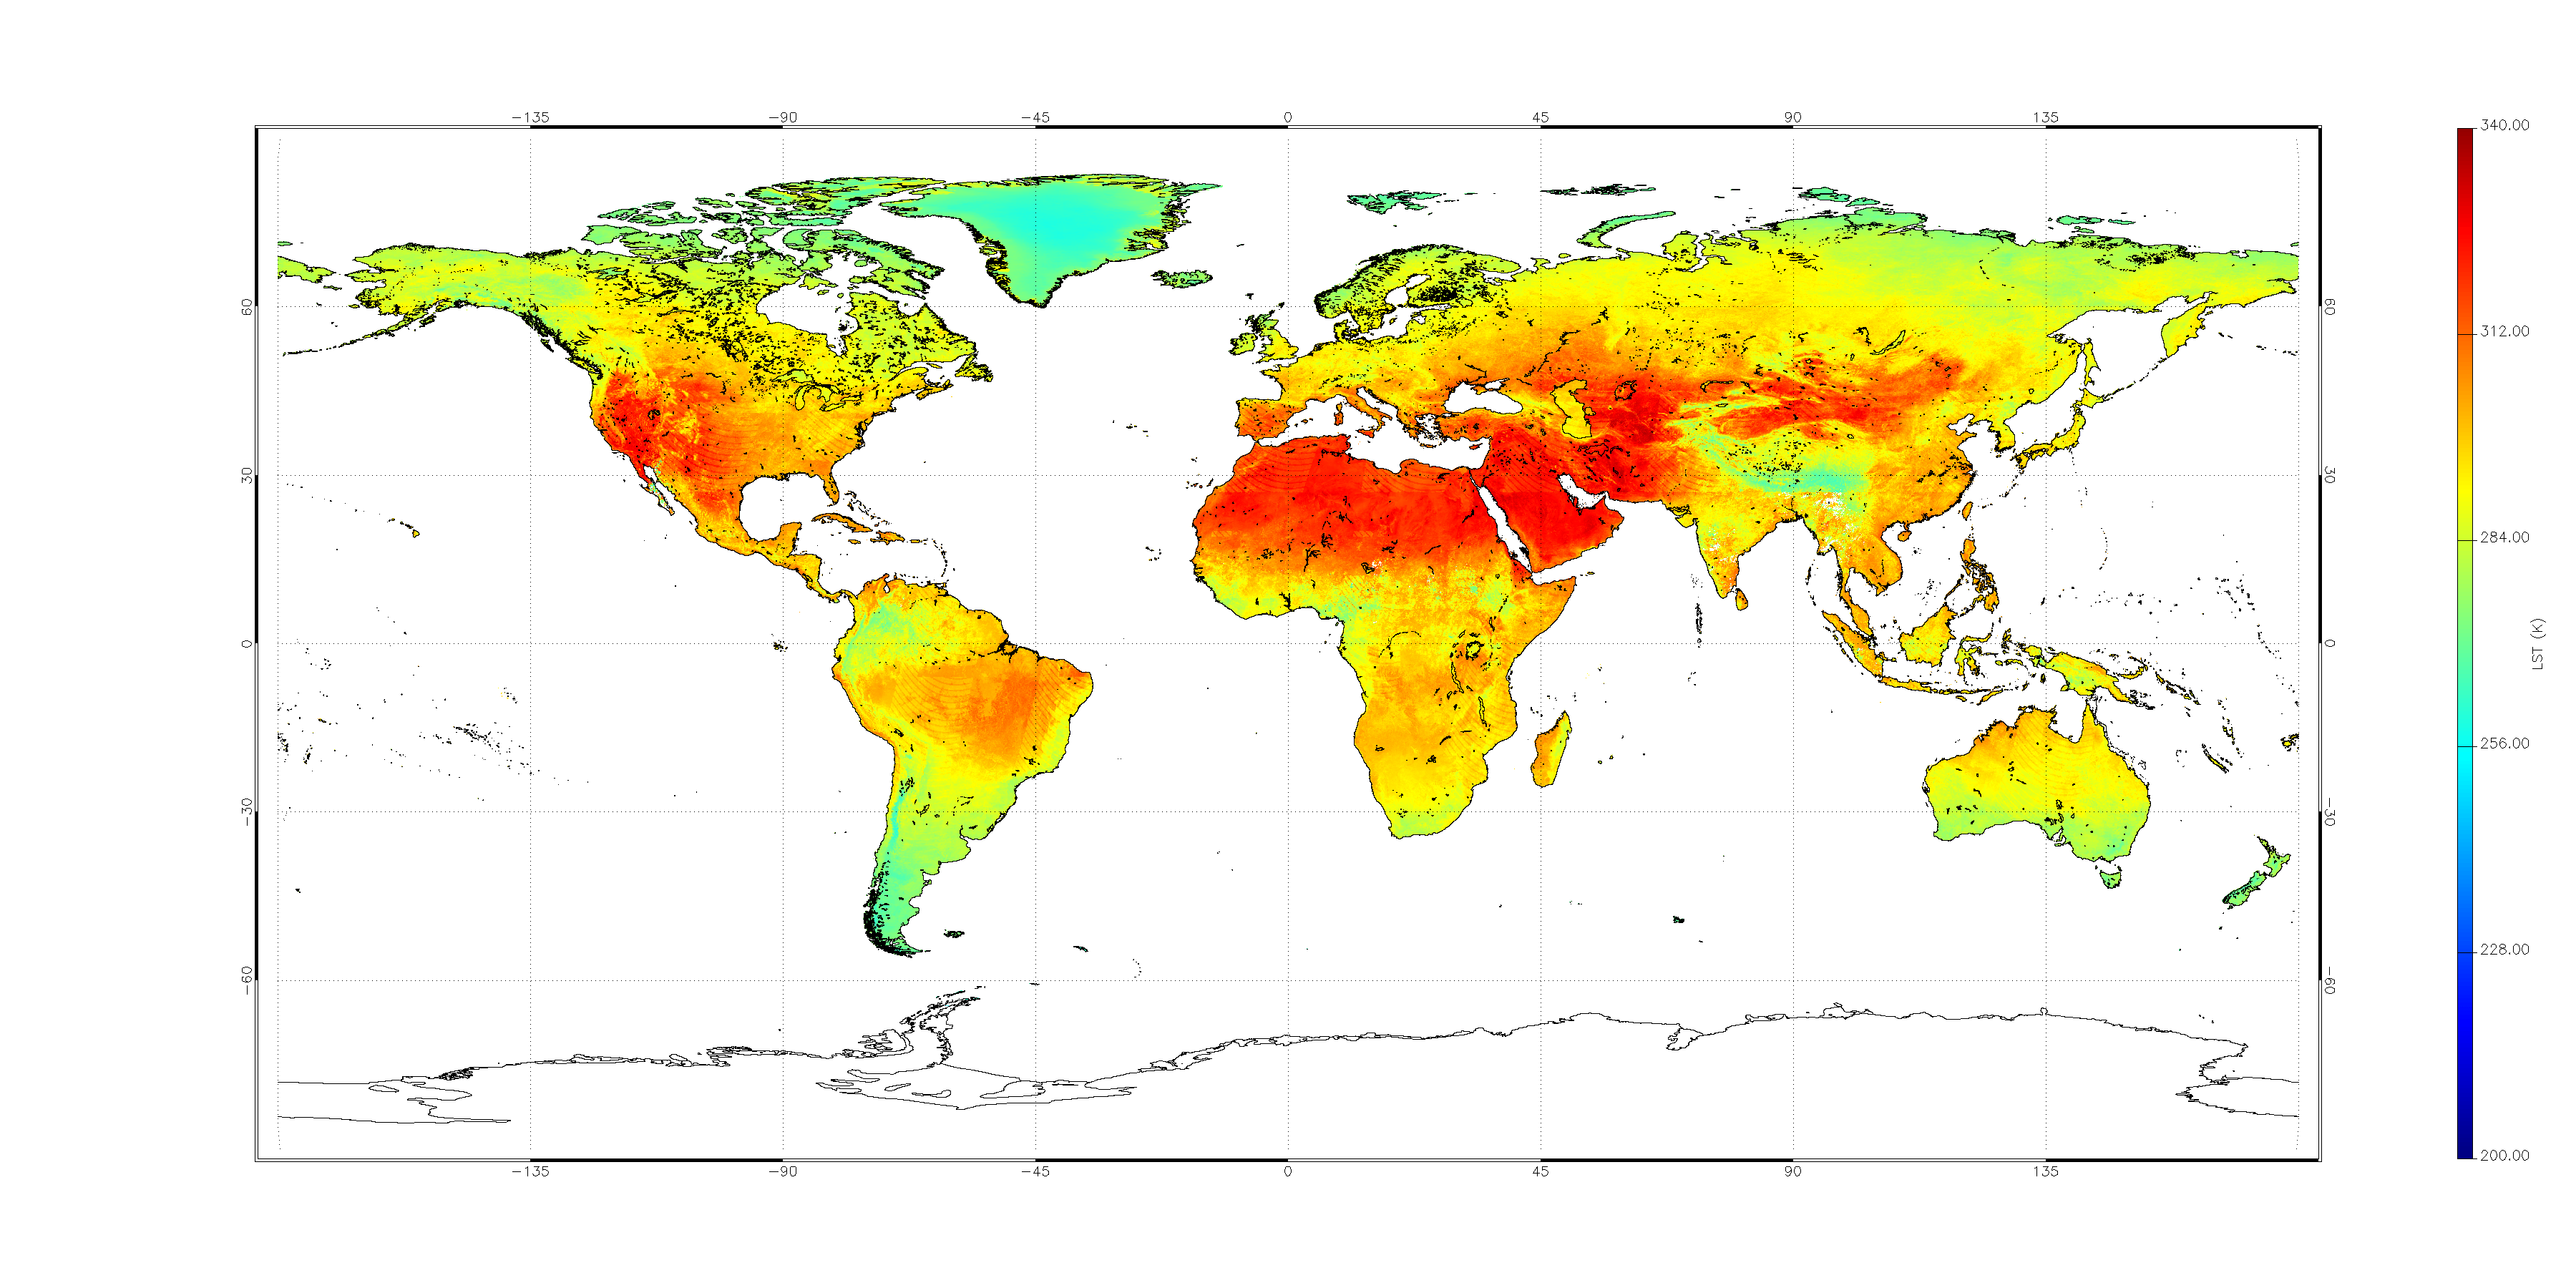 Figure 40: Sentinel-3A senses Earth's heat: Information from Sentinel-3A's radiometer, which measures radiation emitted from Earth's surface, reveal how the temperature of Earth's land changes between July and November 2016. Measurements are in kelvin (image credit: ESA, the image contains modified Copernicus Sentinel data (2016), processed by UK National Center for Earth Observation/University of Leicester)